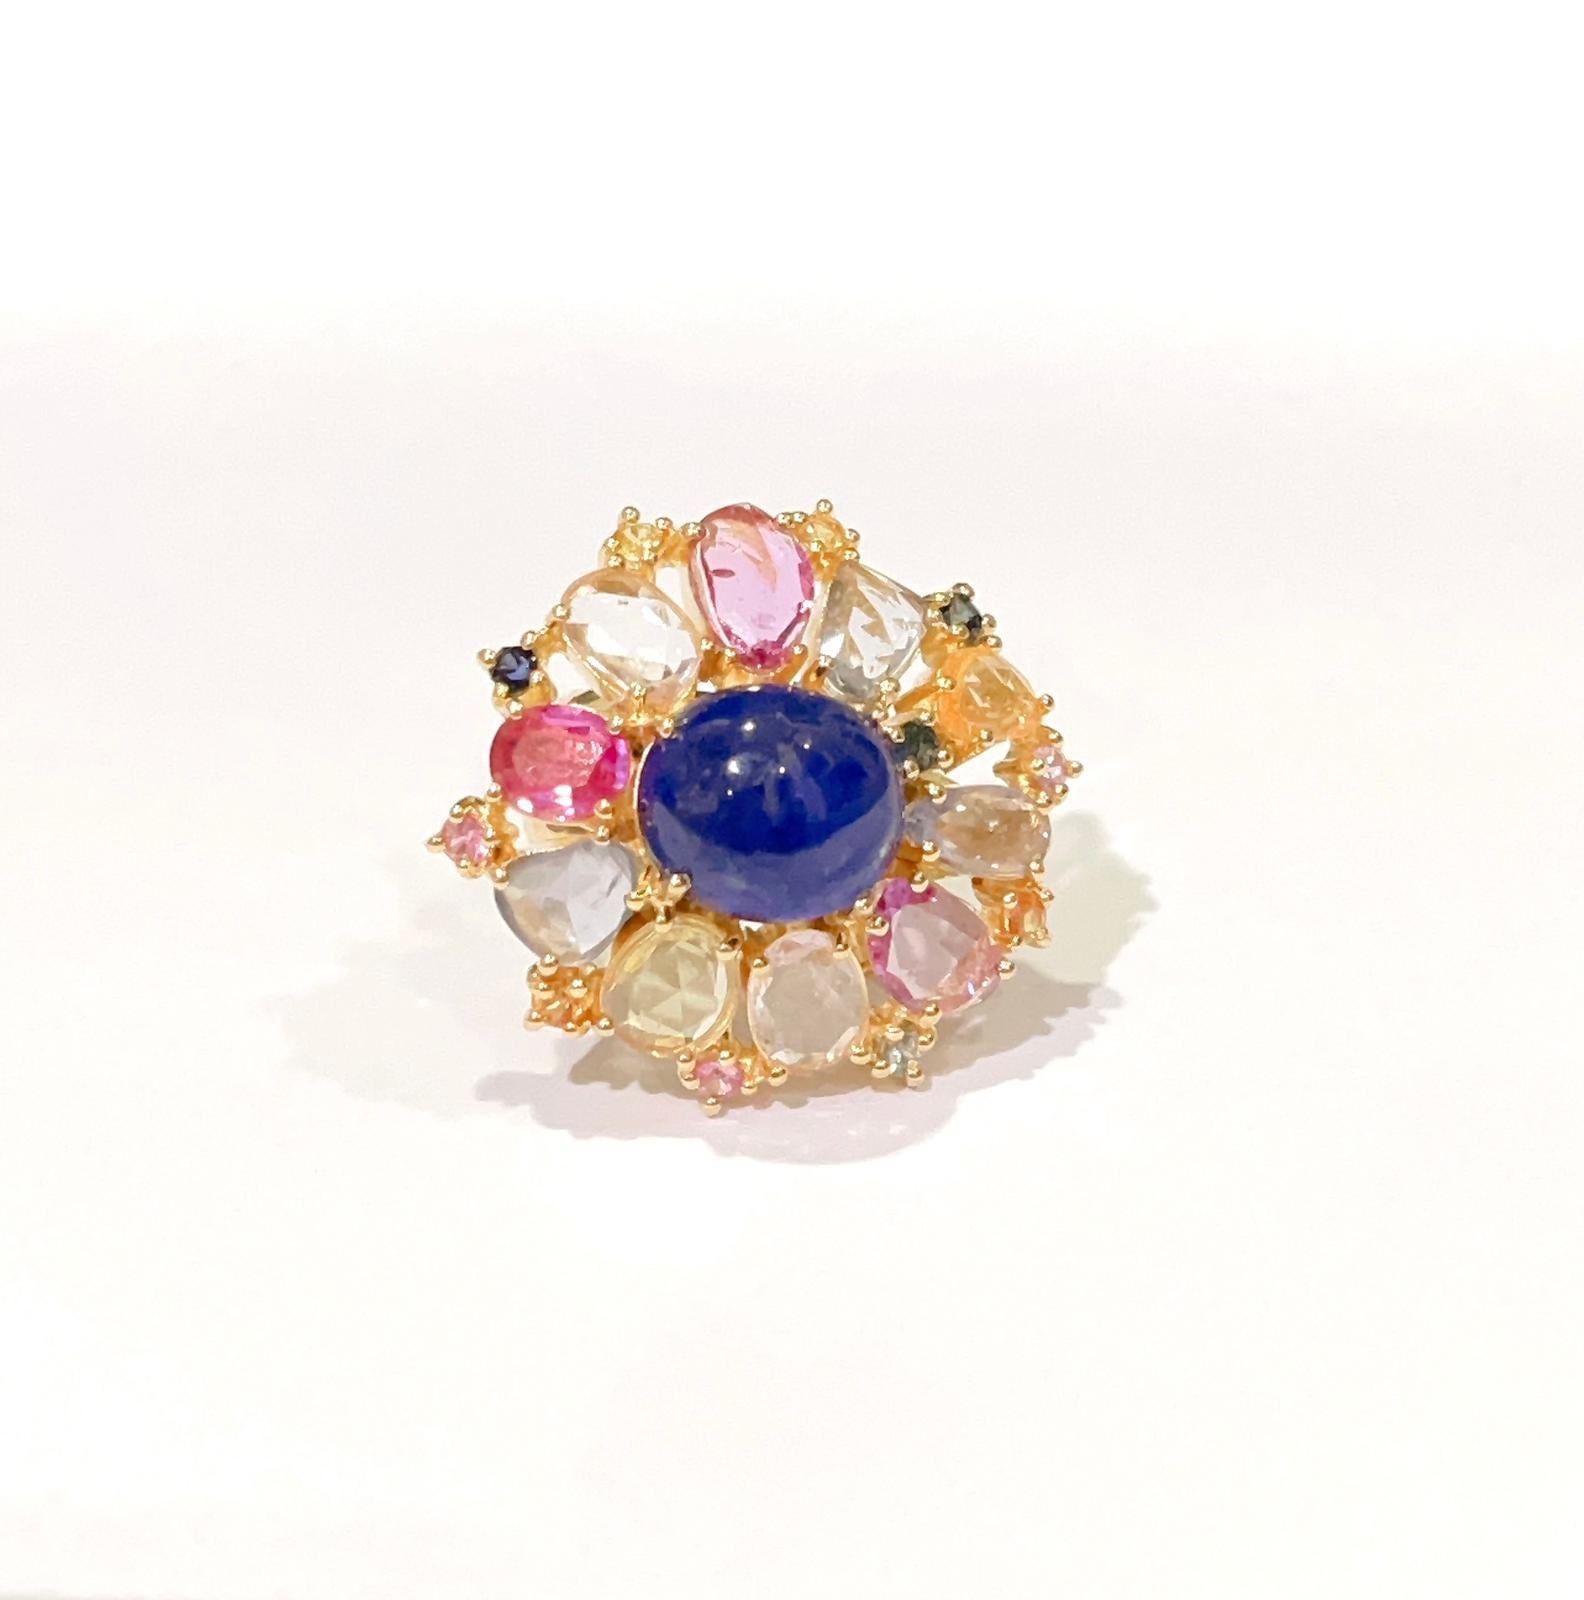 Bochic “Capri” Blue & Rose Cut Sapphires Cocktail Ring Set in 18k Gold & Silver In New Condition For Sale In New York, NY